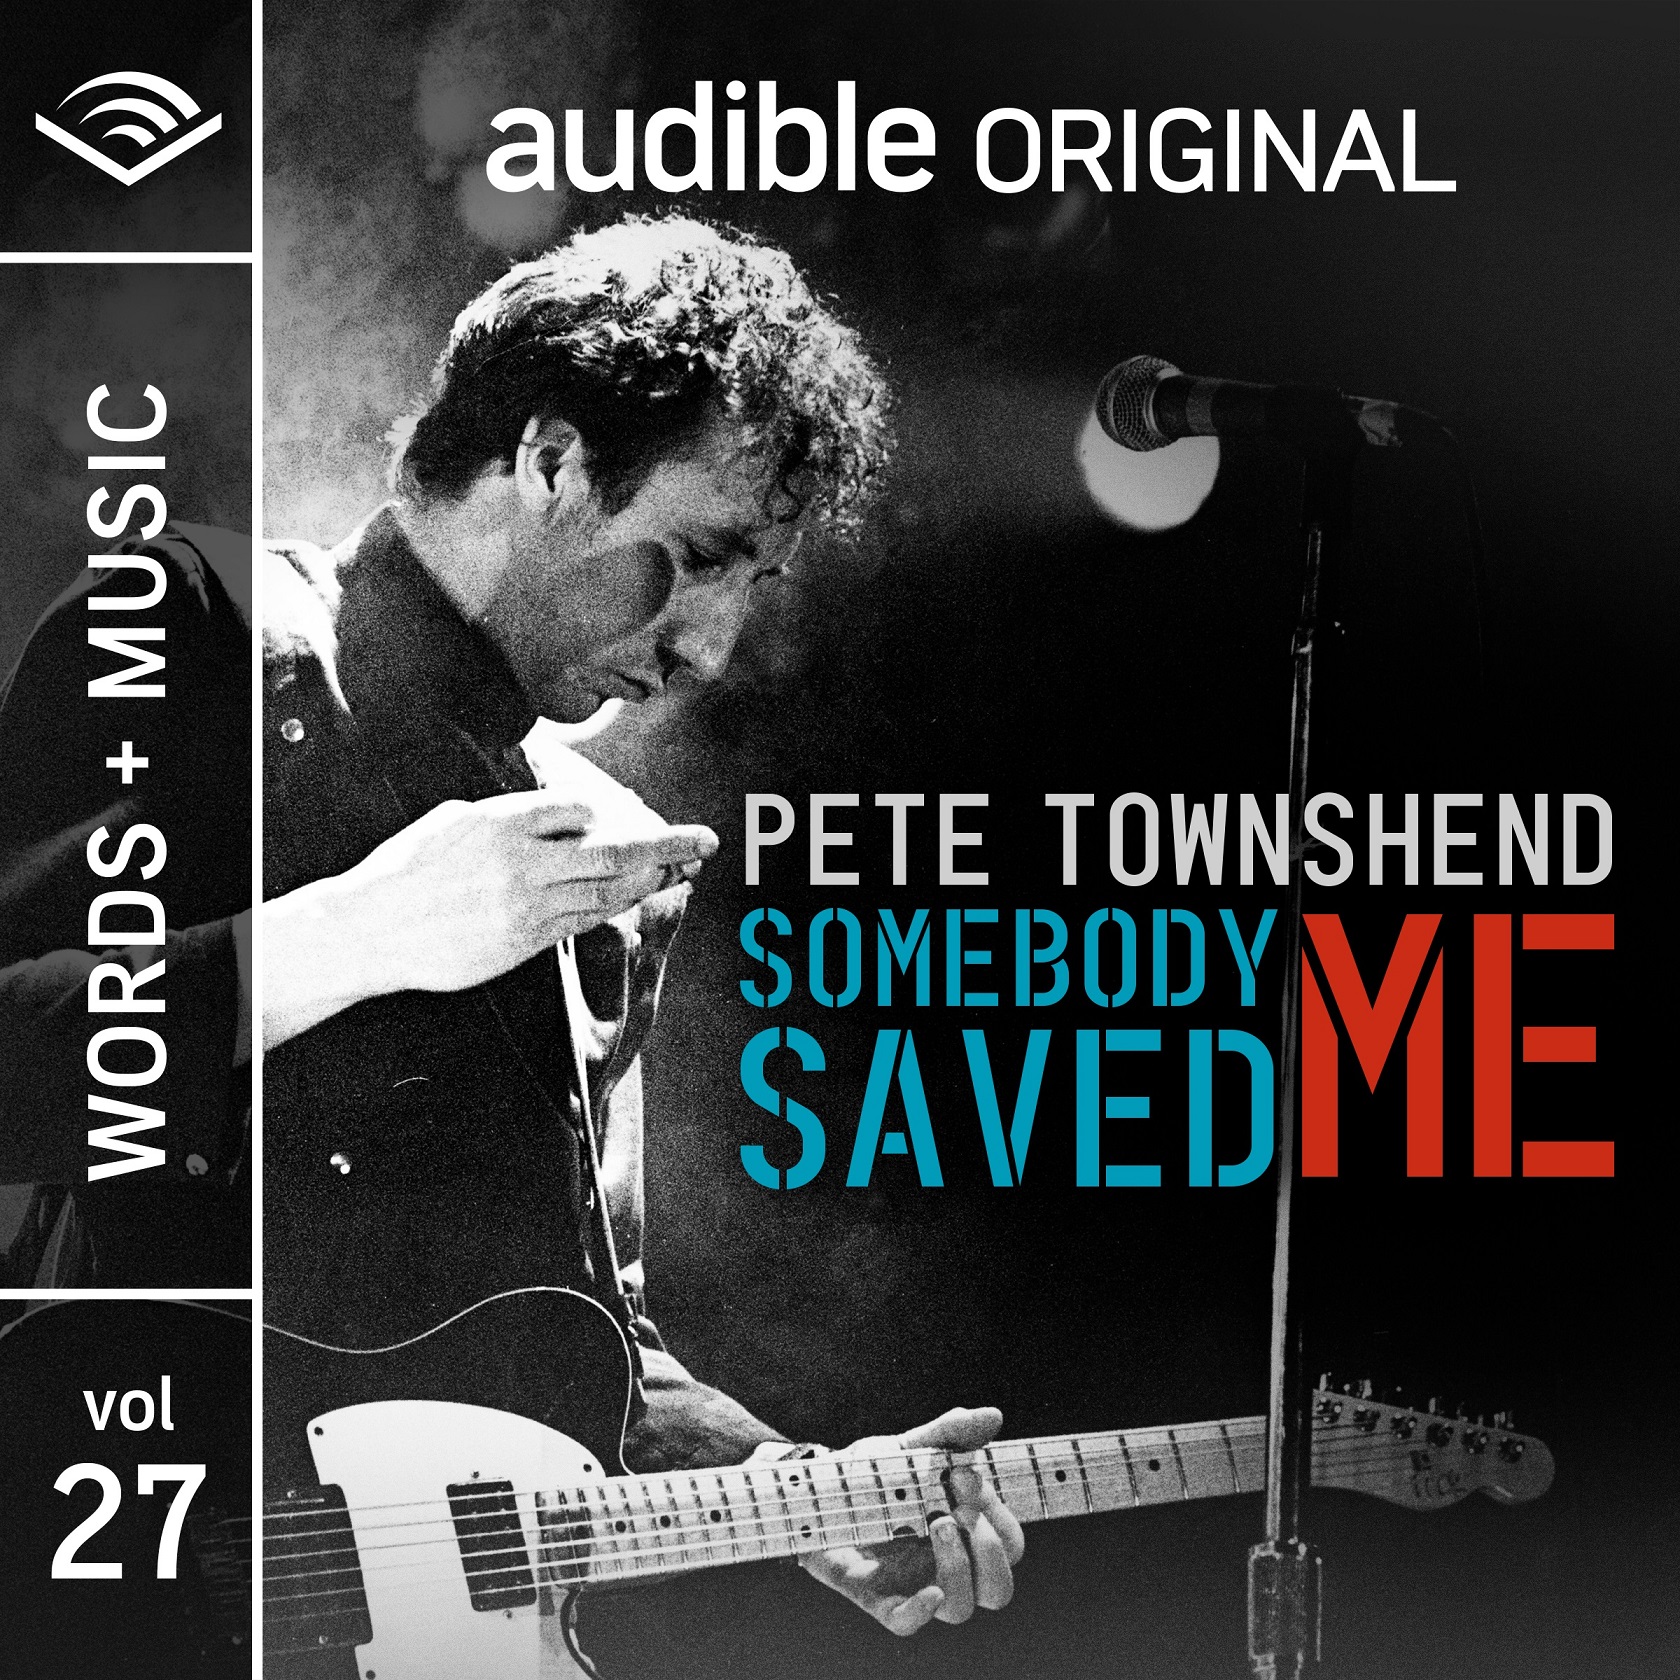 Audible Original Words + Music artists lineup will kick-off with Pete Townshend’s Somebody Saved Me premiering May 6